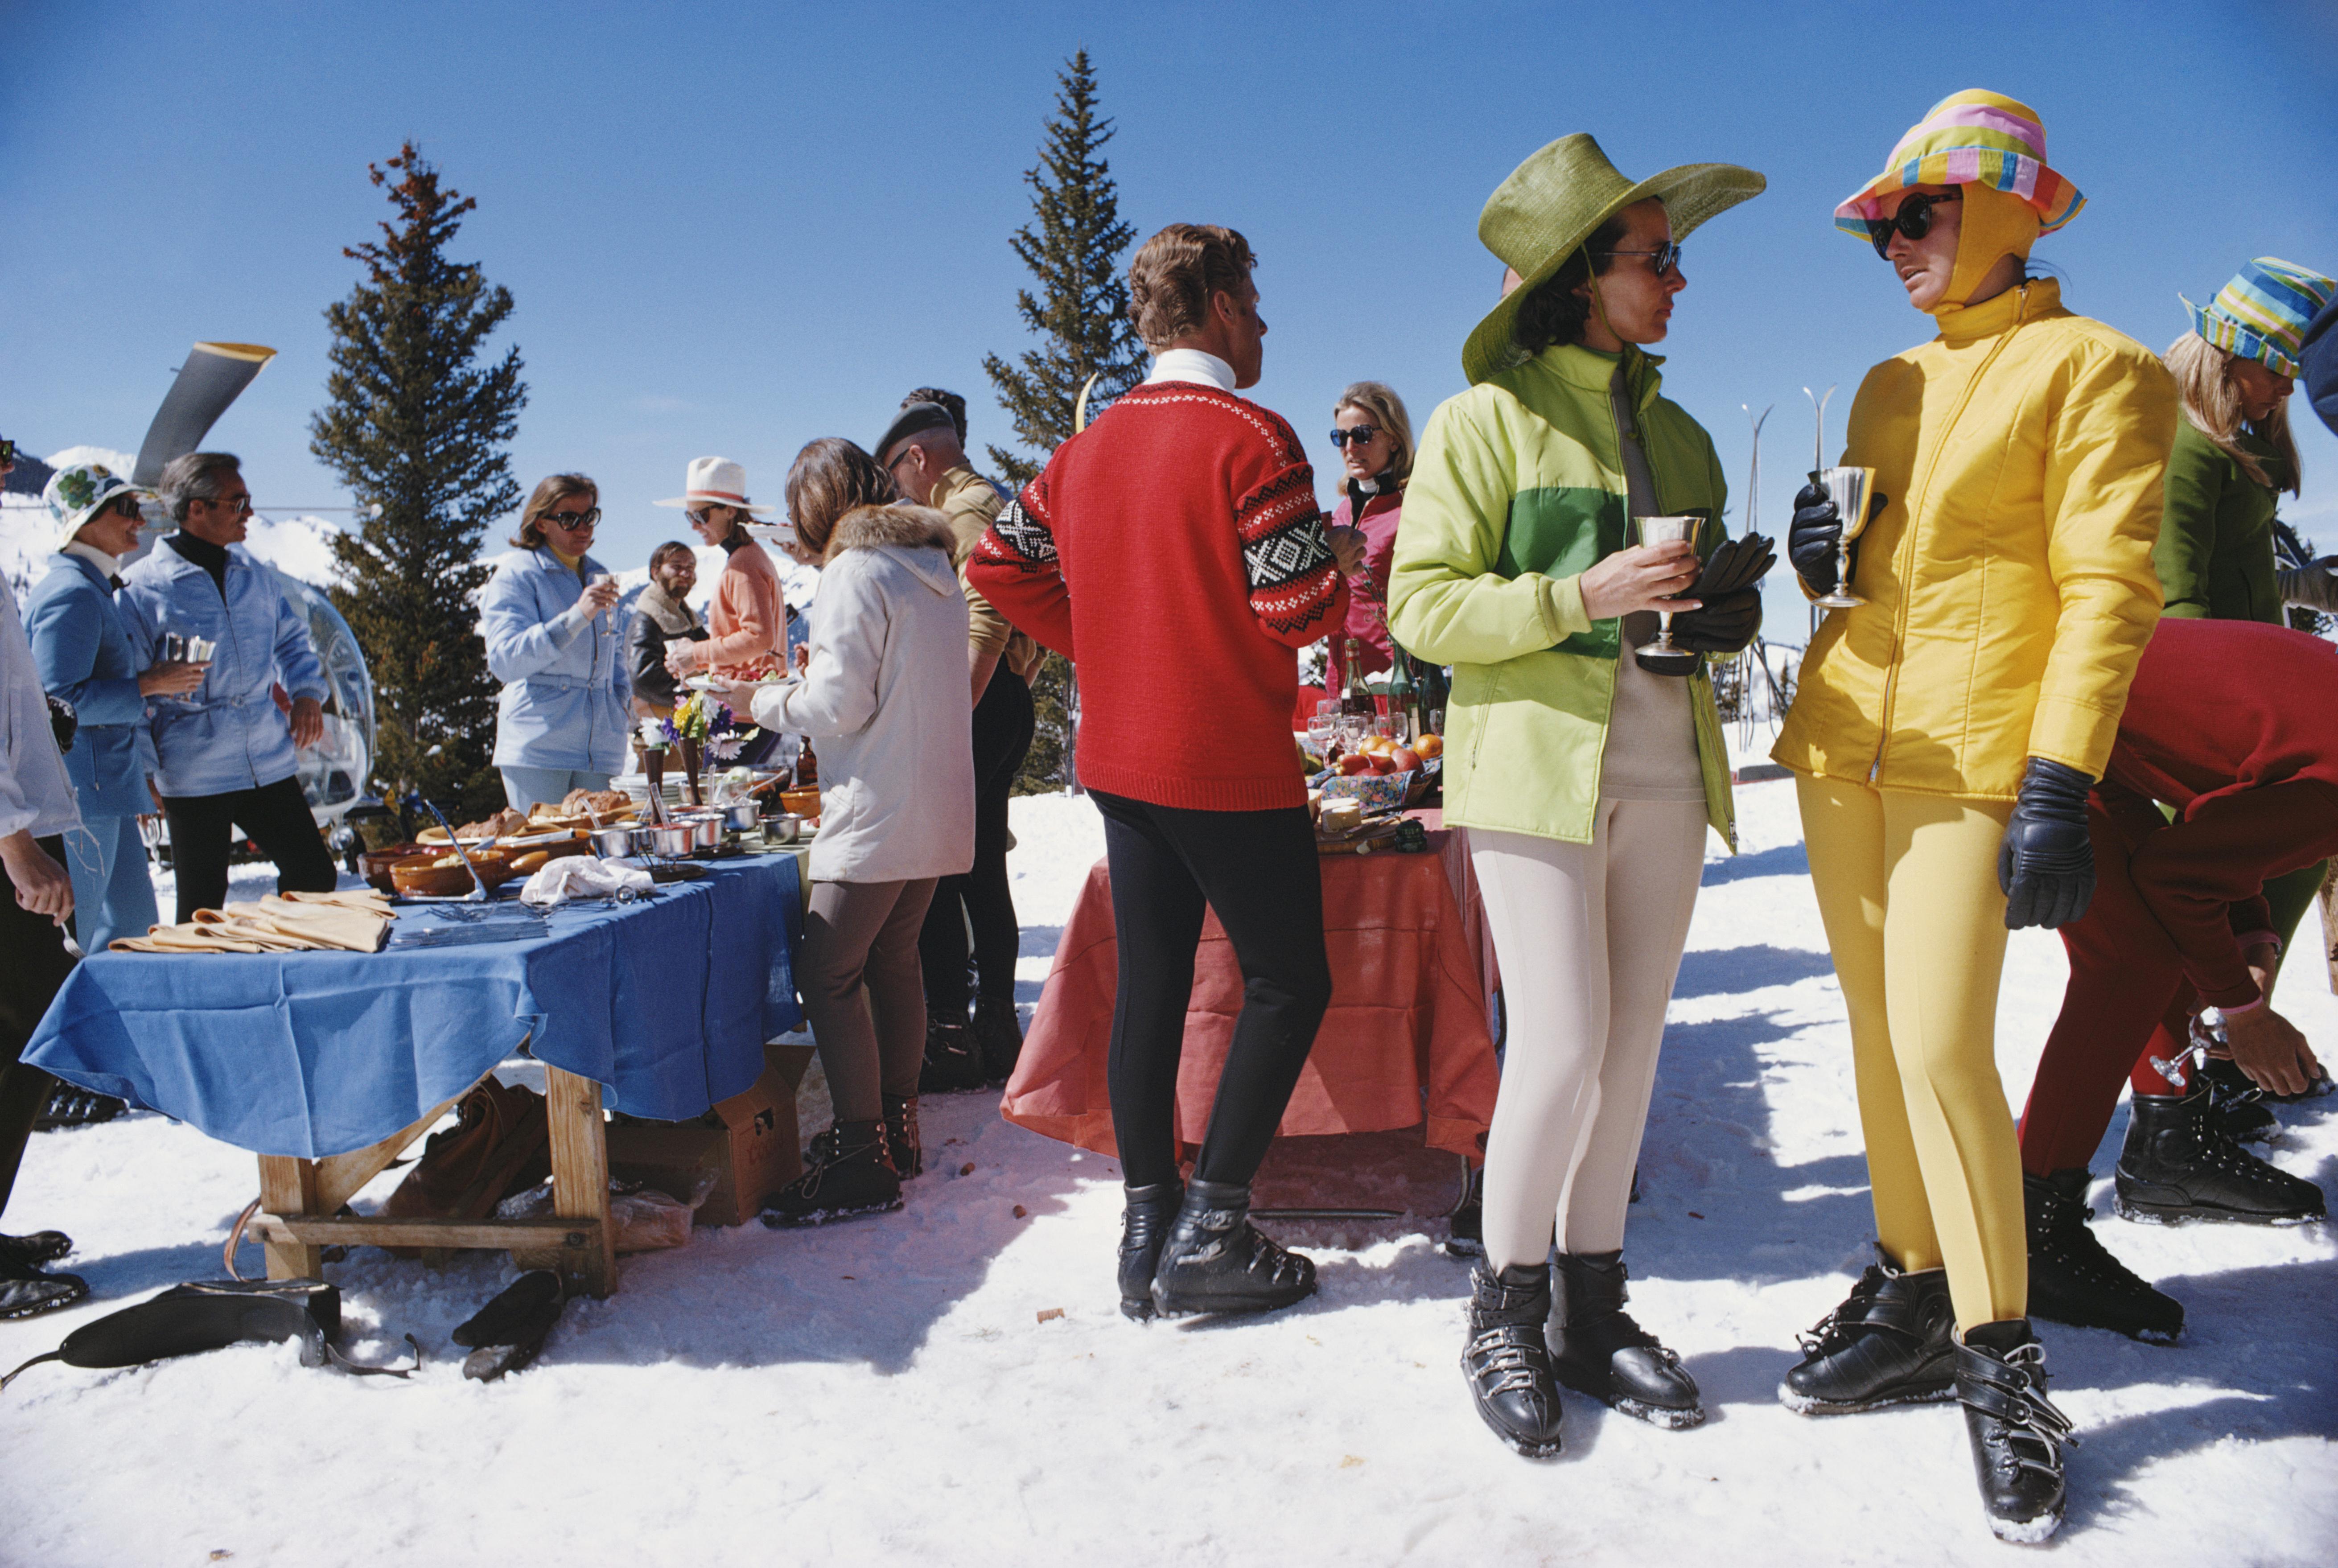 'Snowmass Gathering' 1968 Slim Aarons Limited Estate Edition

Two women, wearing brightly-coloured skiwear, stand in the foreground of a group of people attending a party in Snowmass Village, in Pitkin County, Colorado, in April 1968.

Produced from